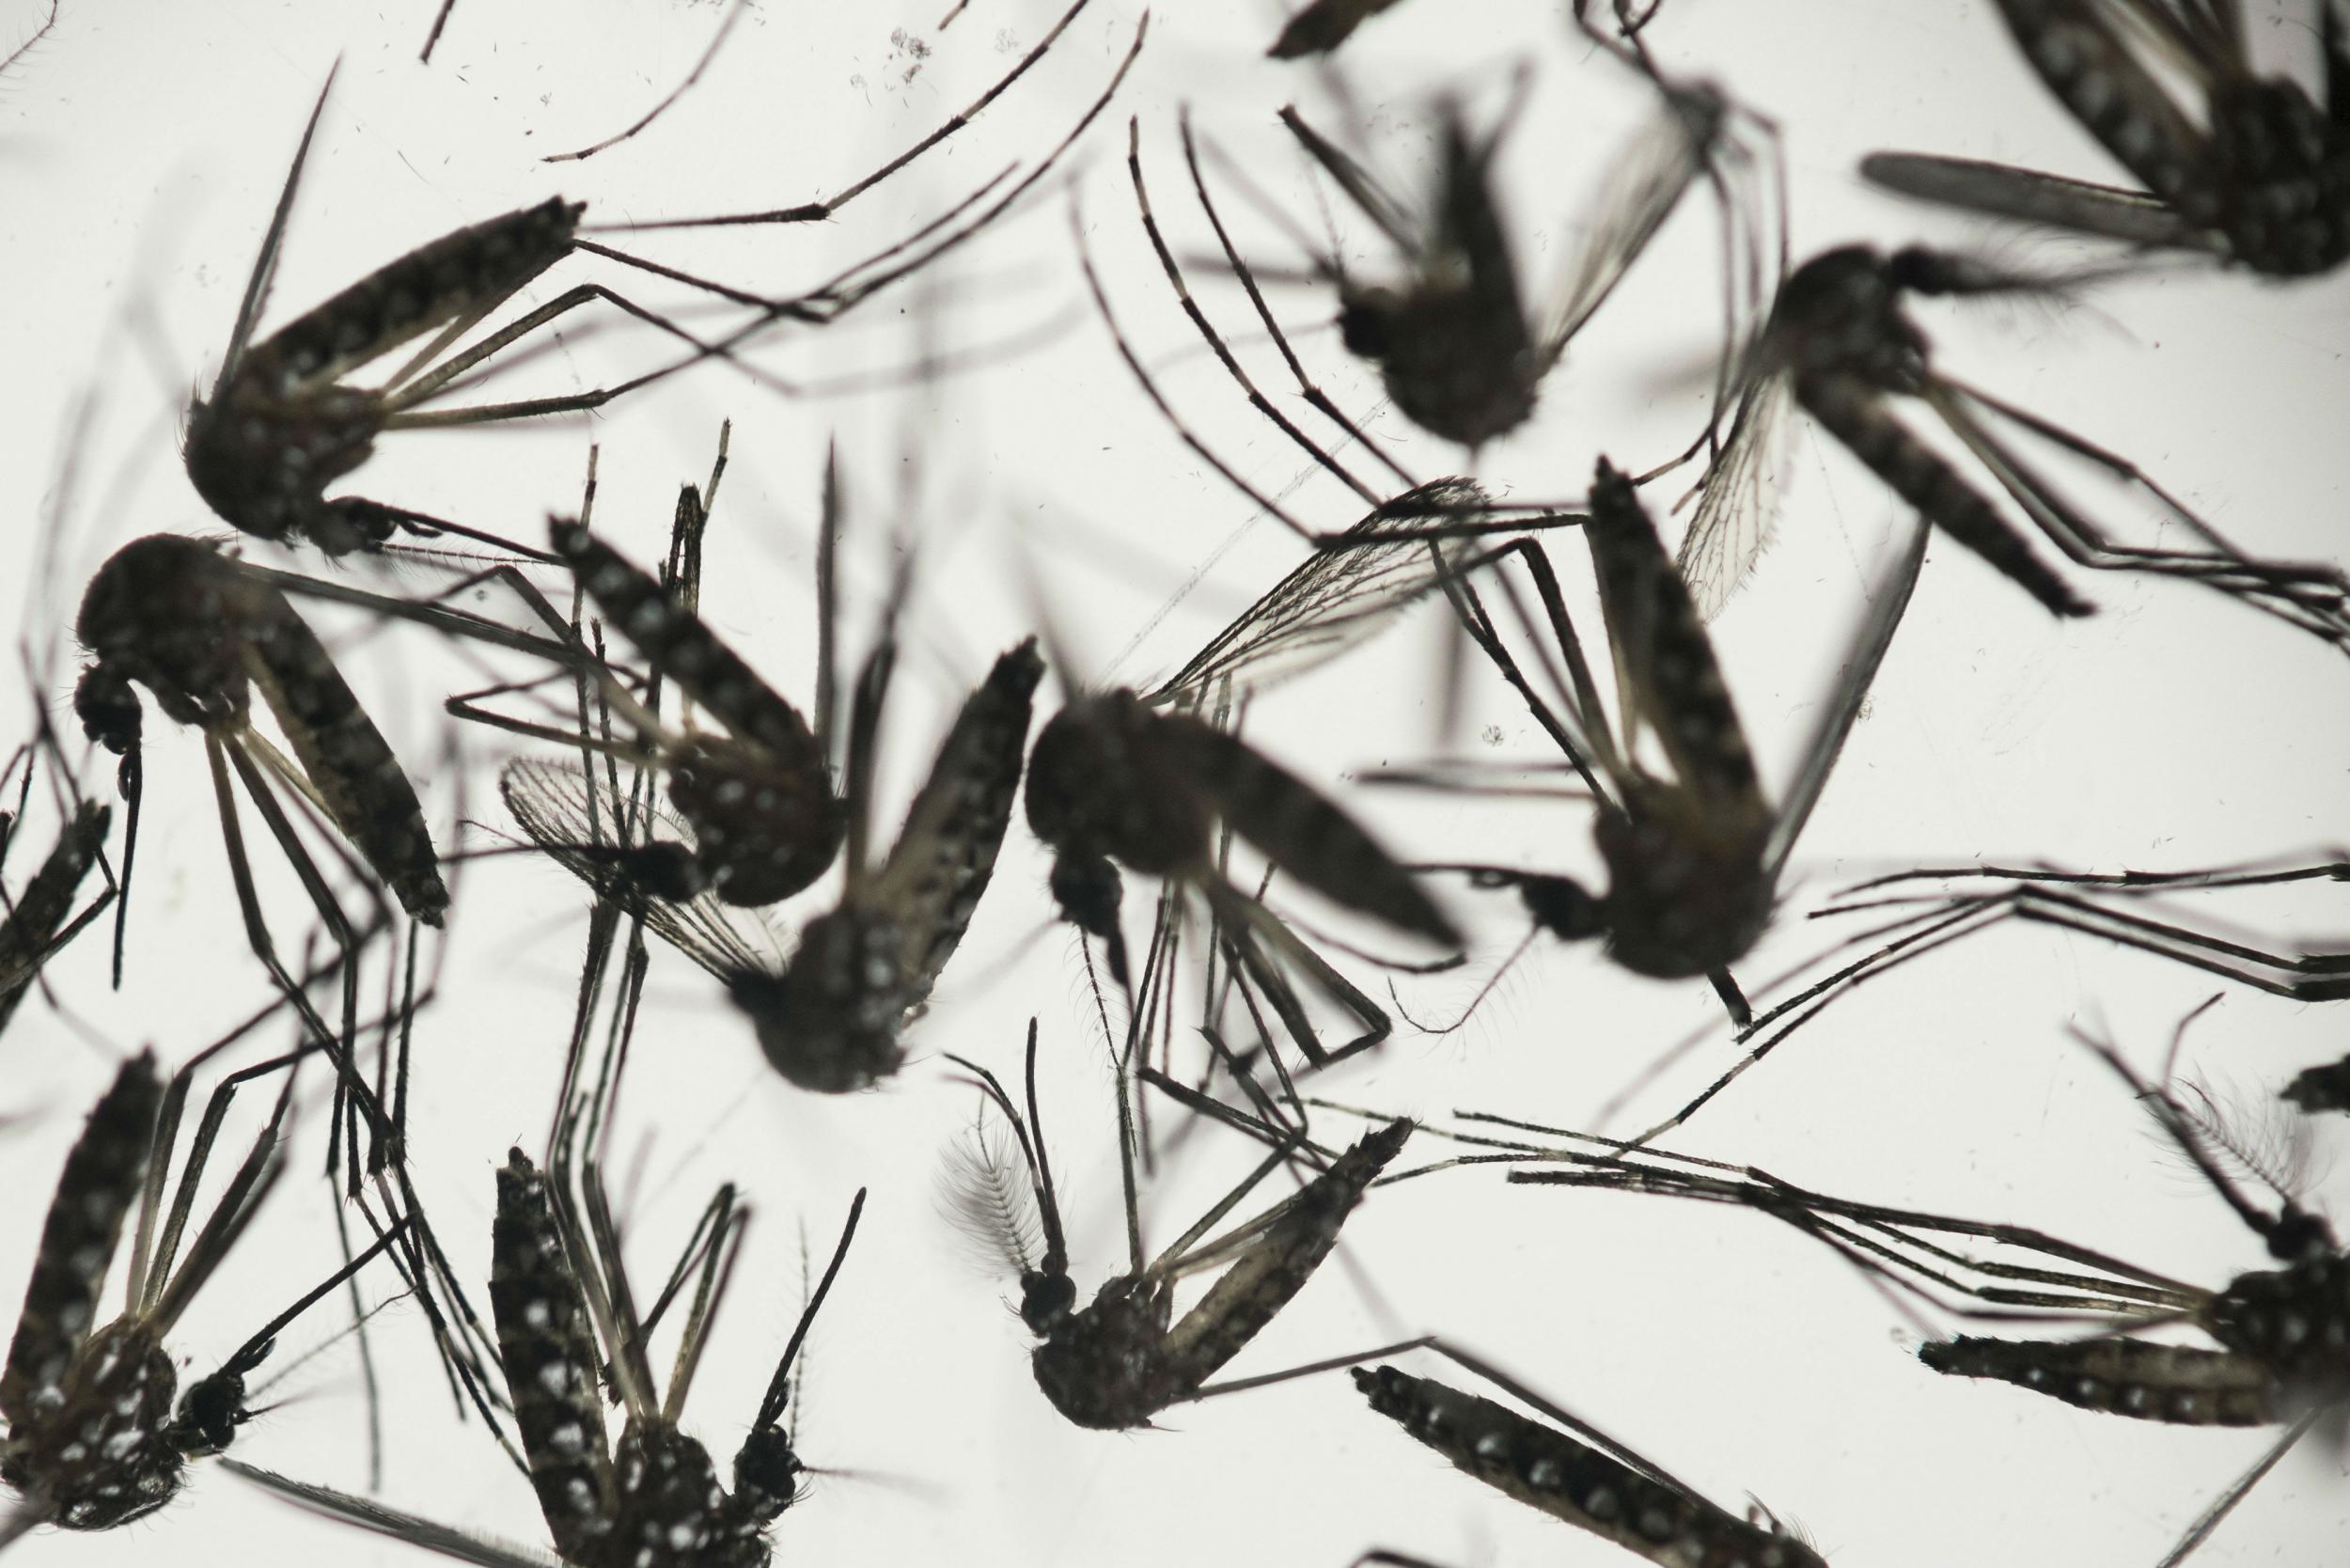 Aedes aegypti mosquito is responsible for transmission of the virus